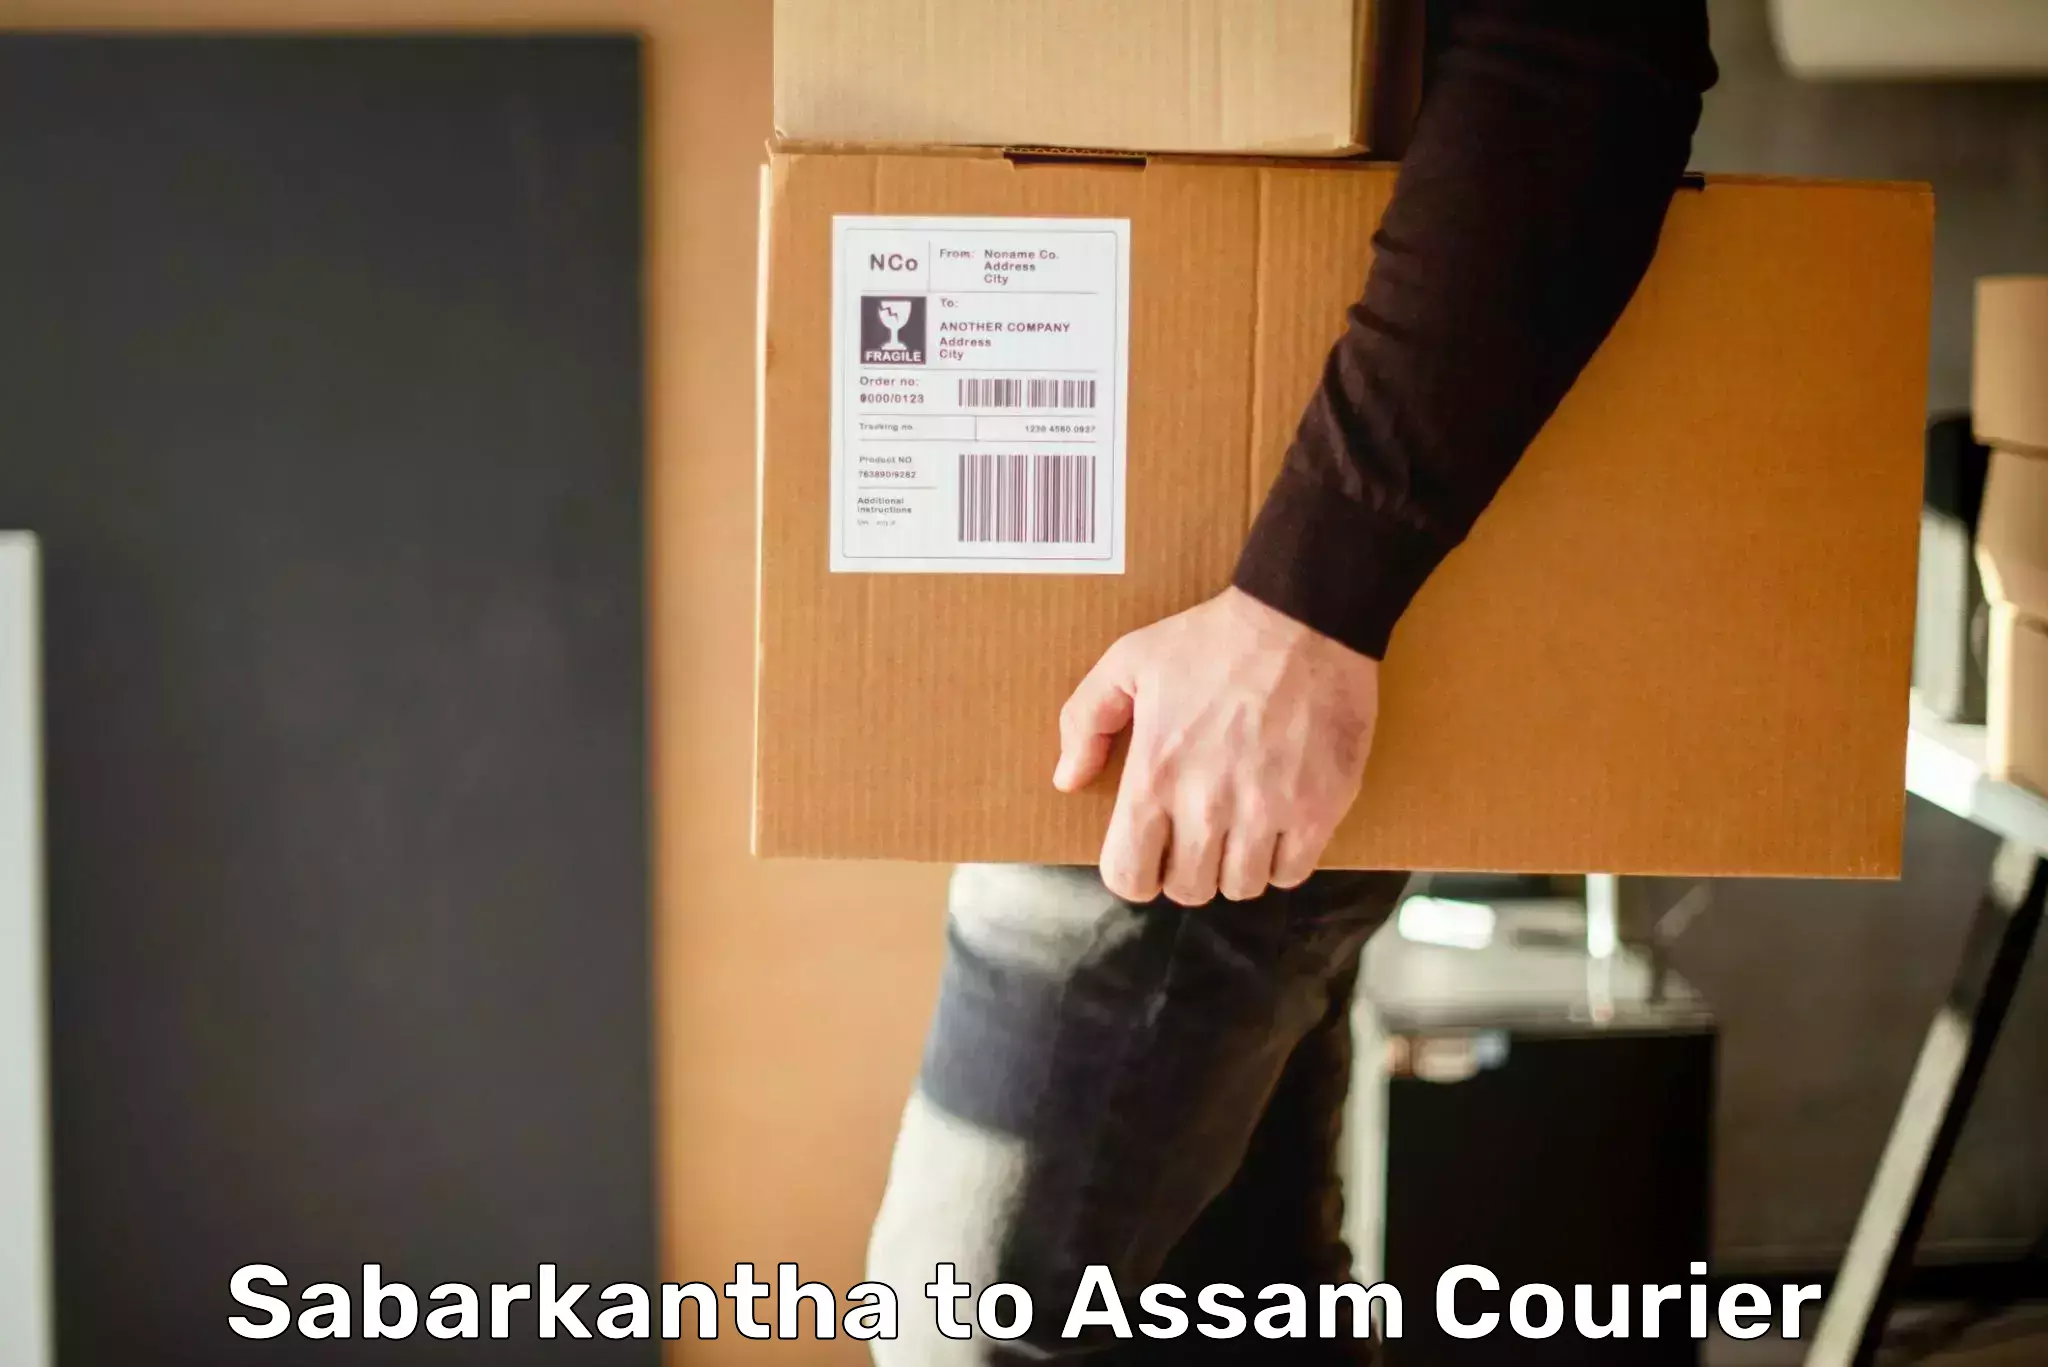 Residential courier service Sabarkantha to Guwahati University